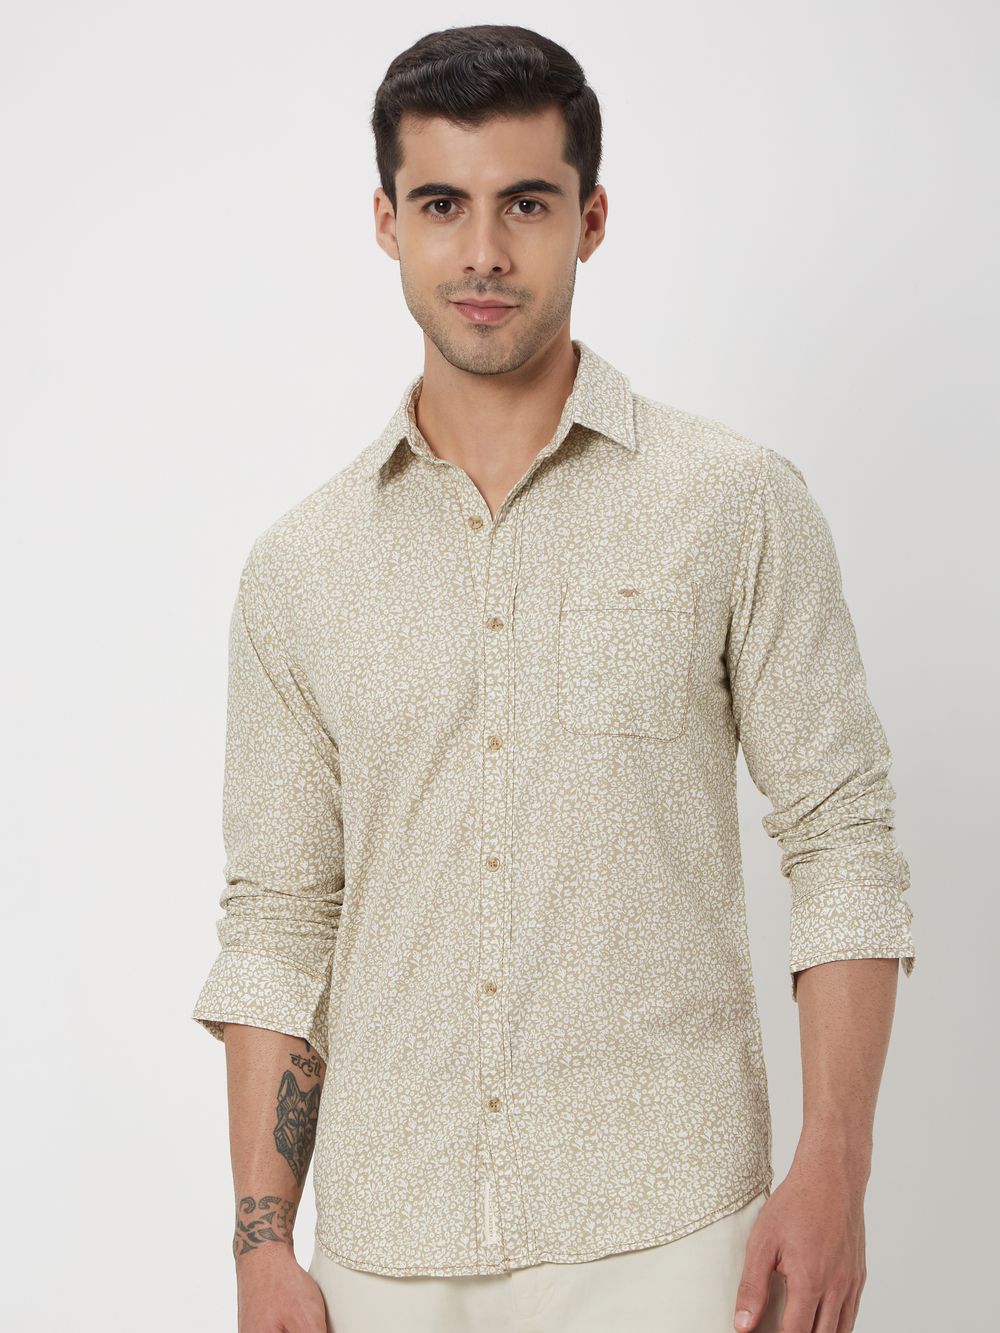 Beige & White Floral Print Slim Fit Casual Shirt